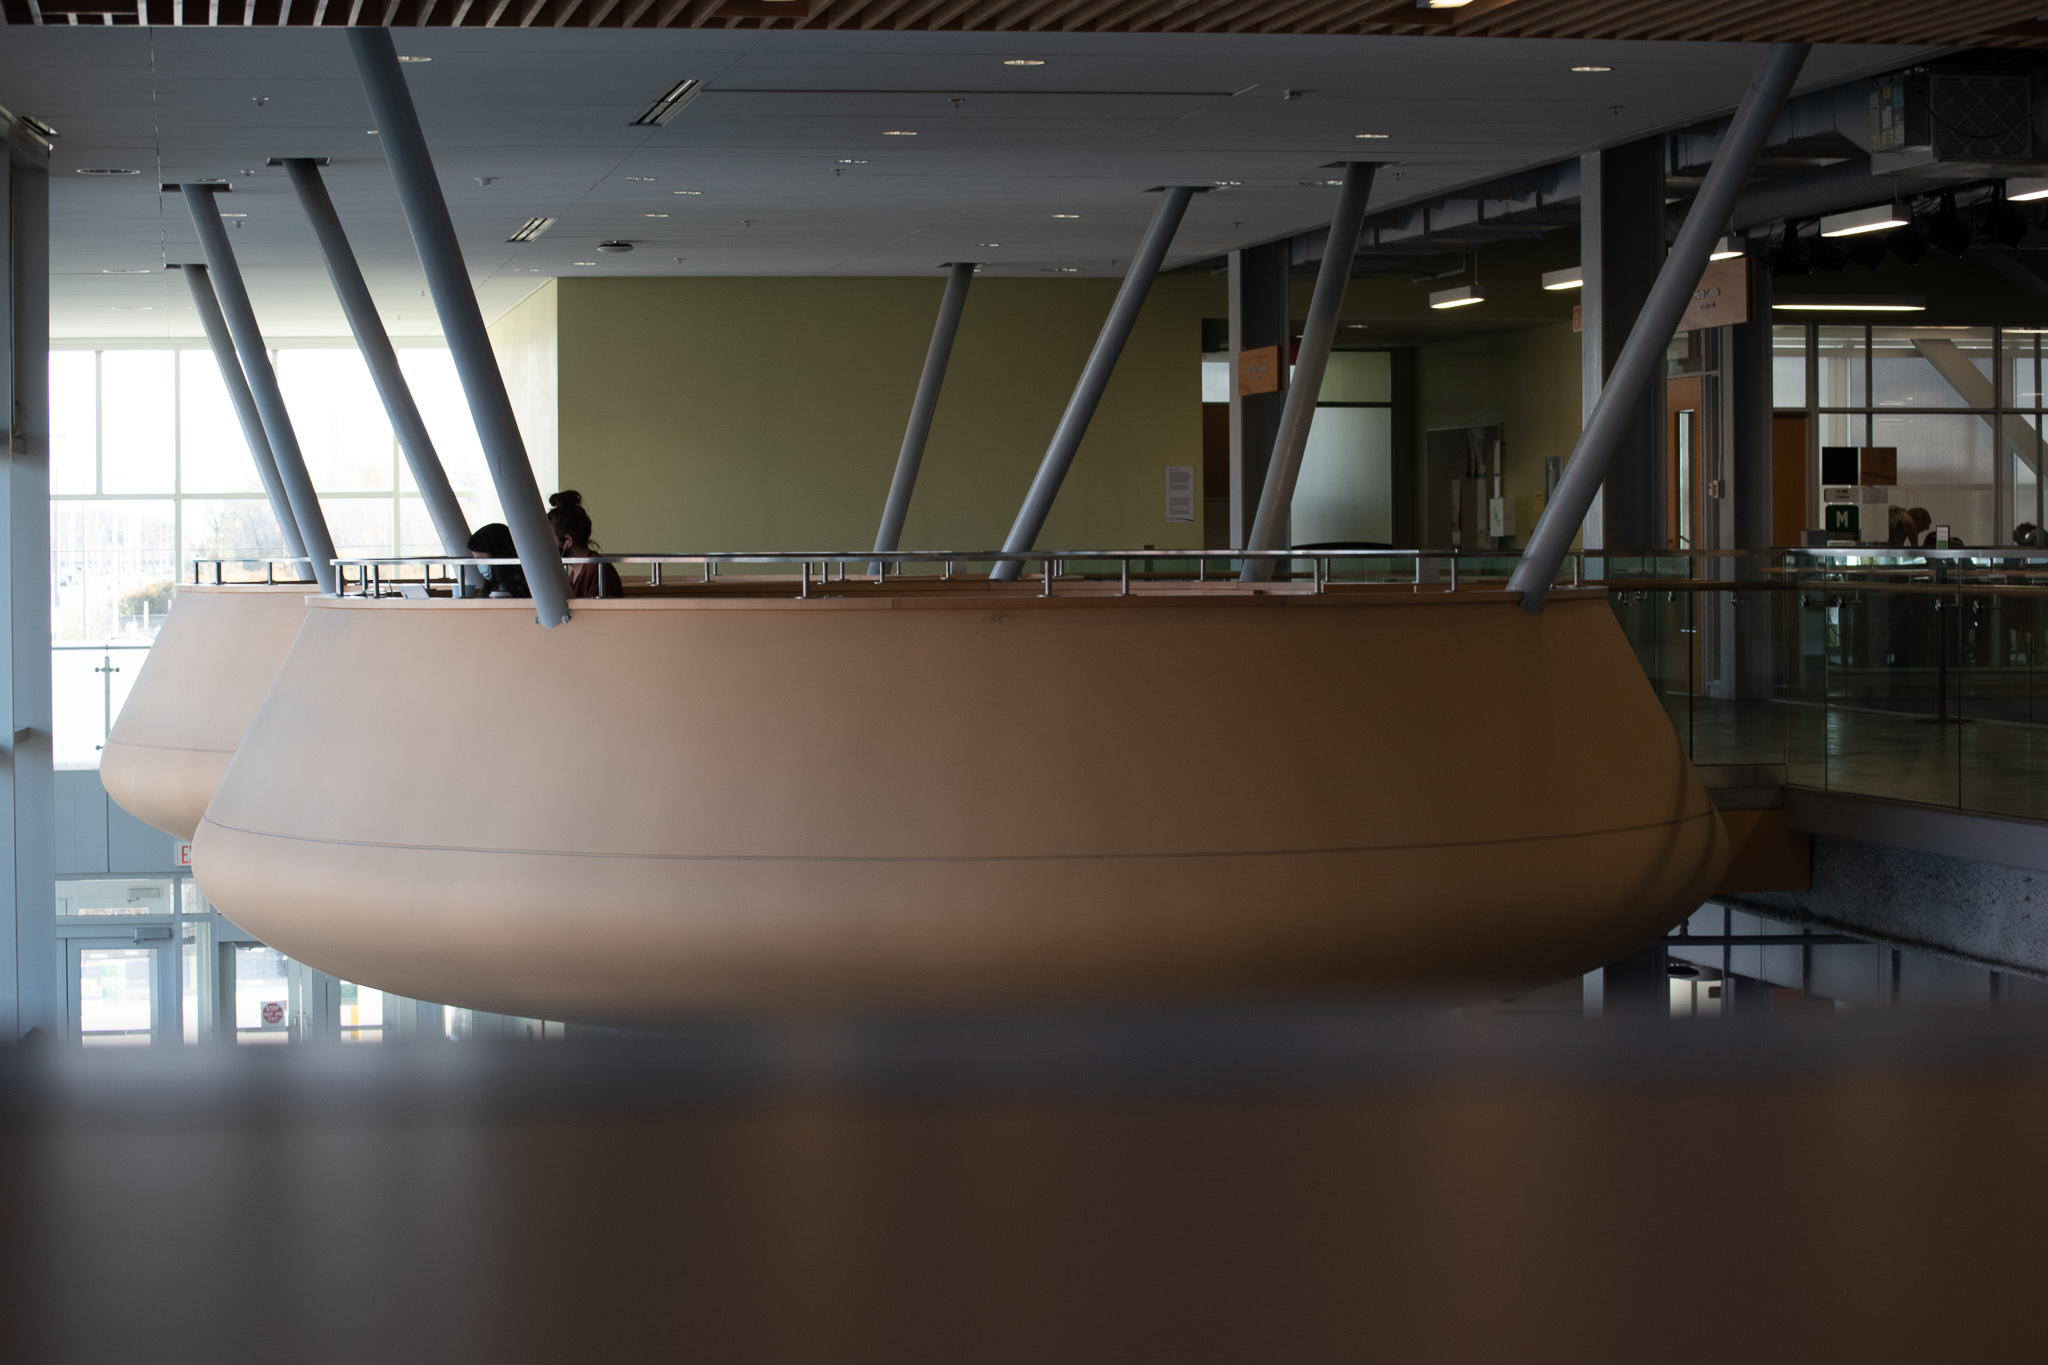 Study pods can be found at Algonquin's Woodroffe campus.